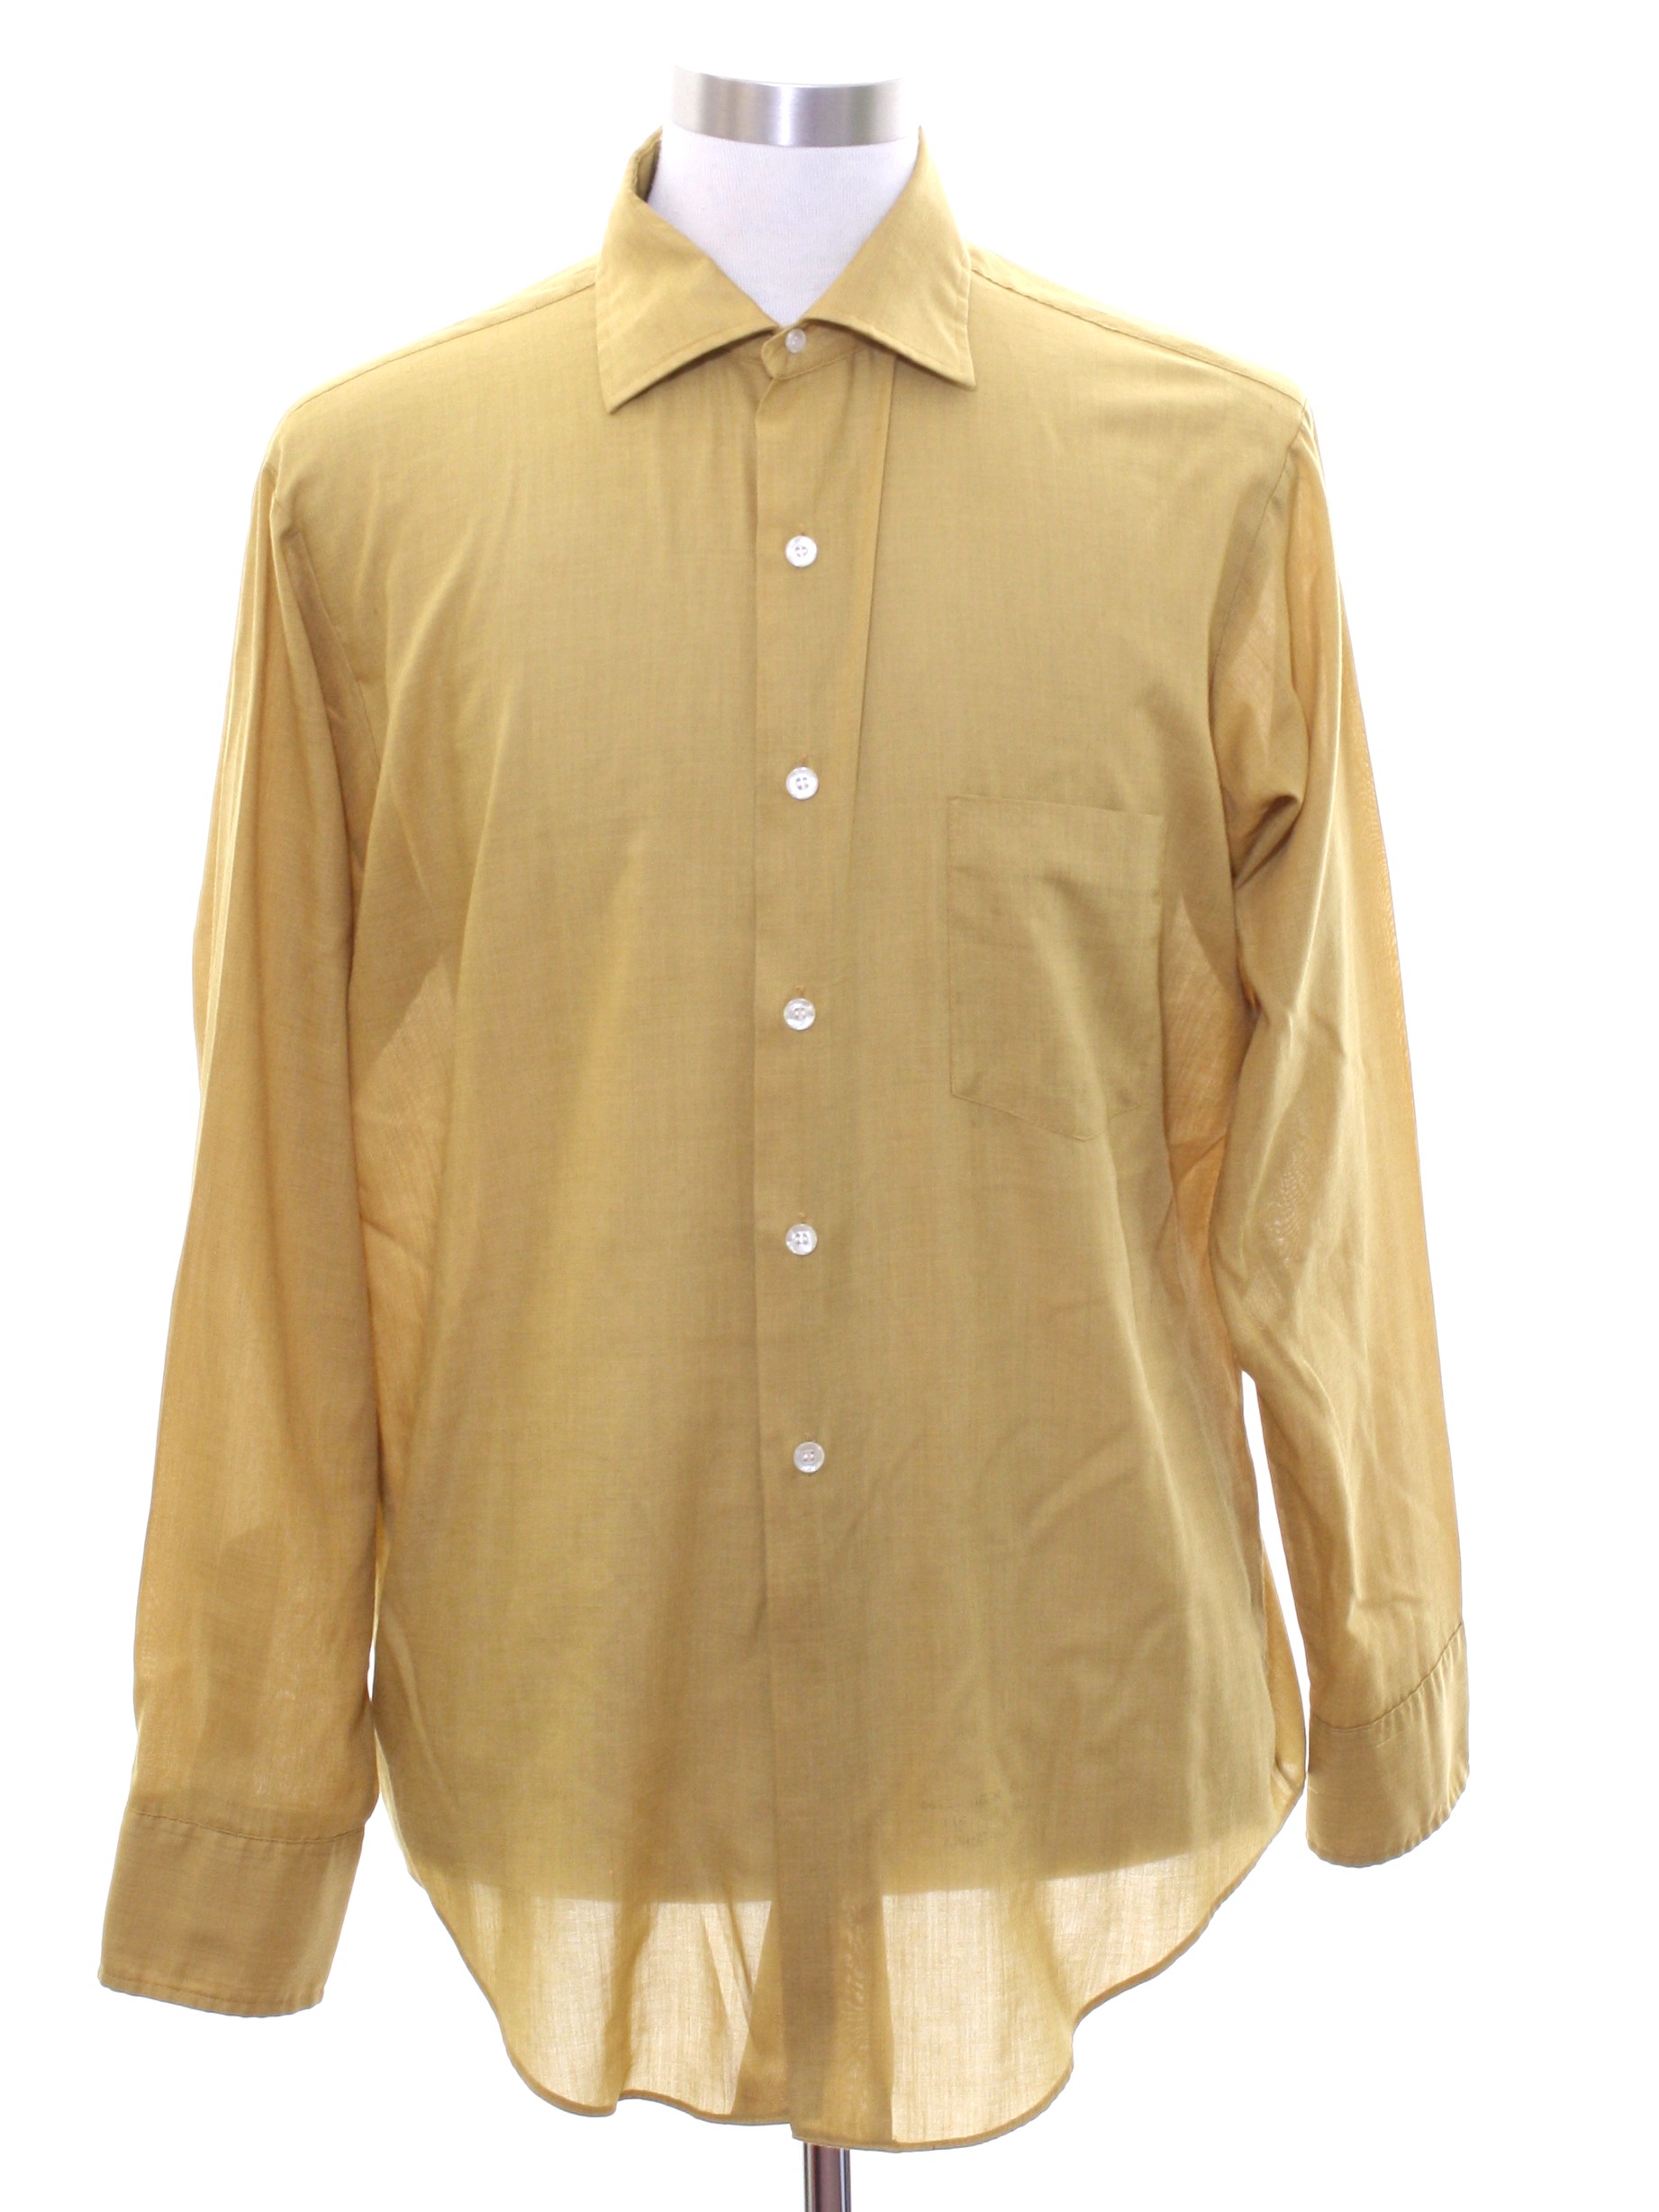 Towncraft Sixties Vintage Shirt: 60s -Towncraft- Mens harvest gold ...